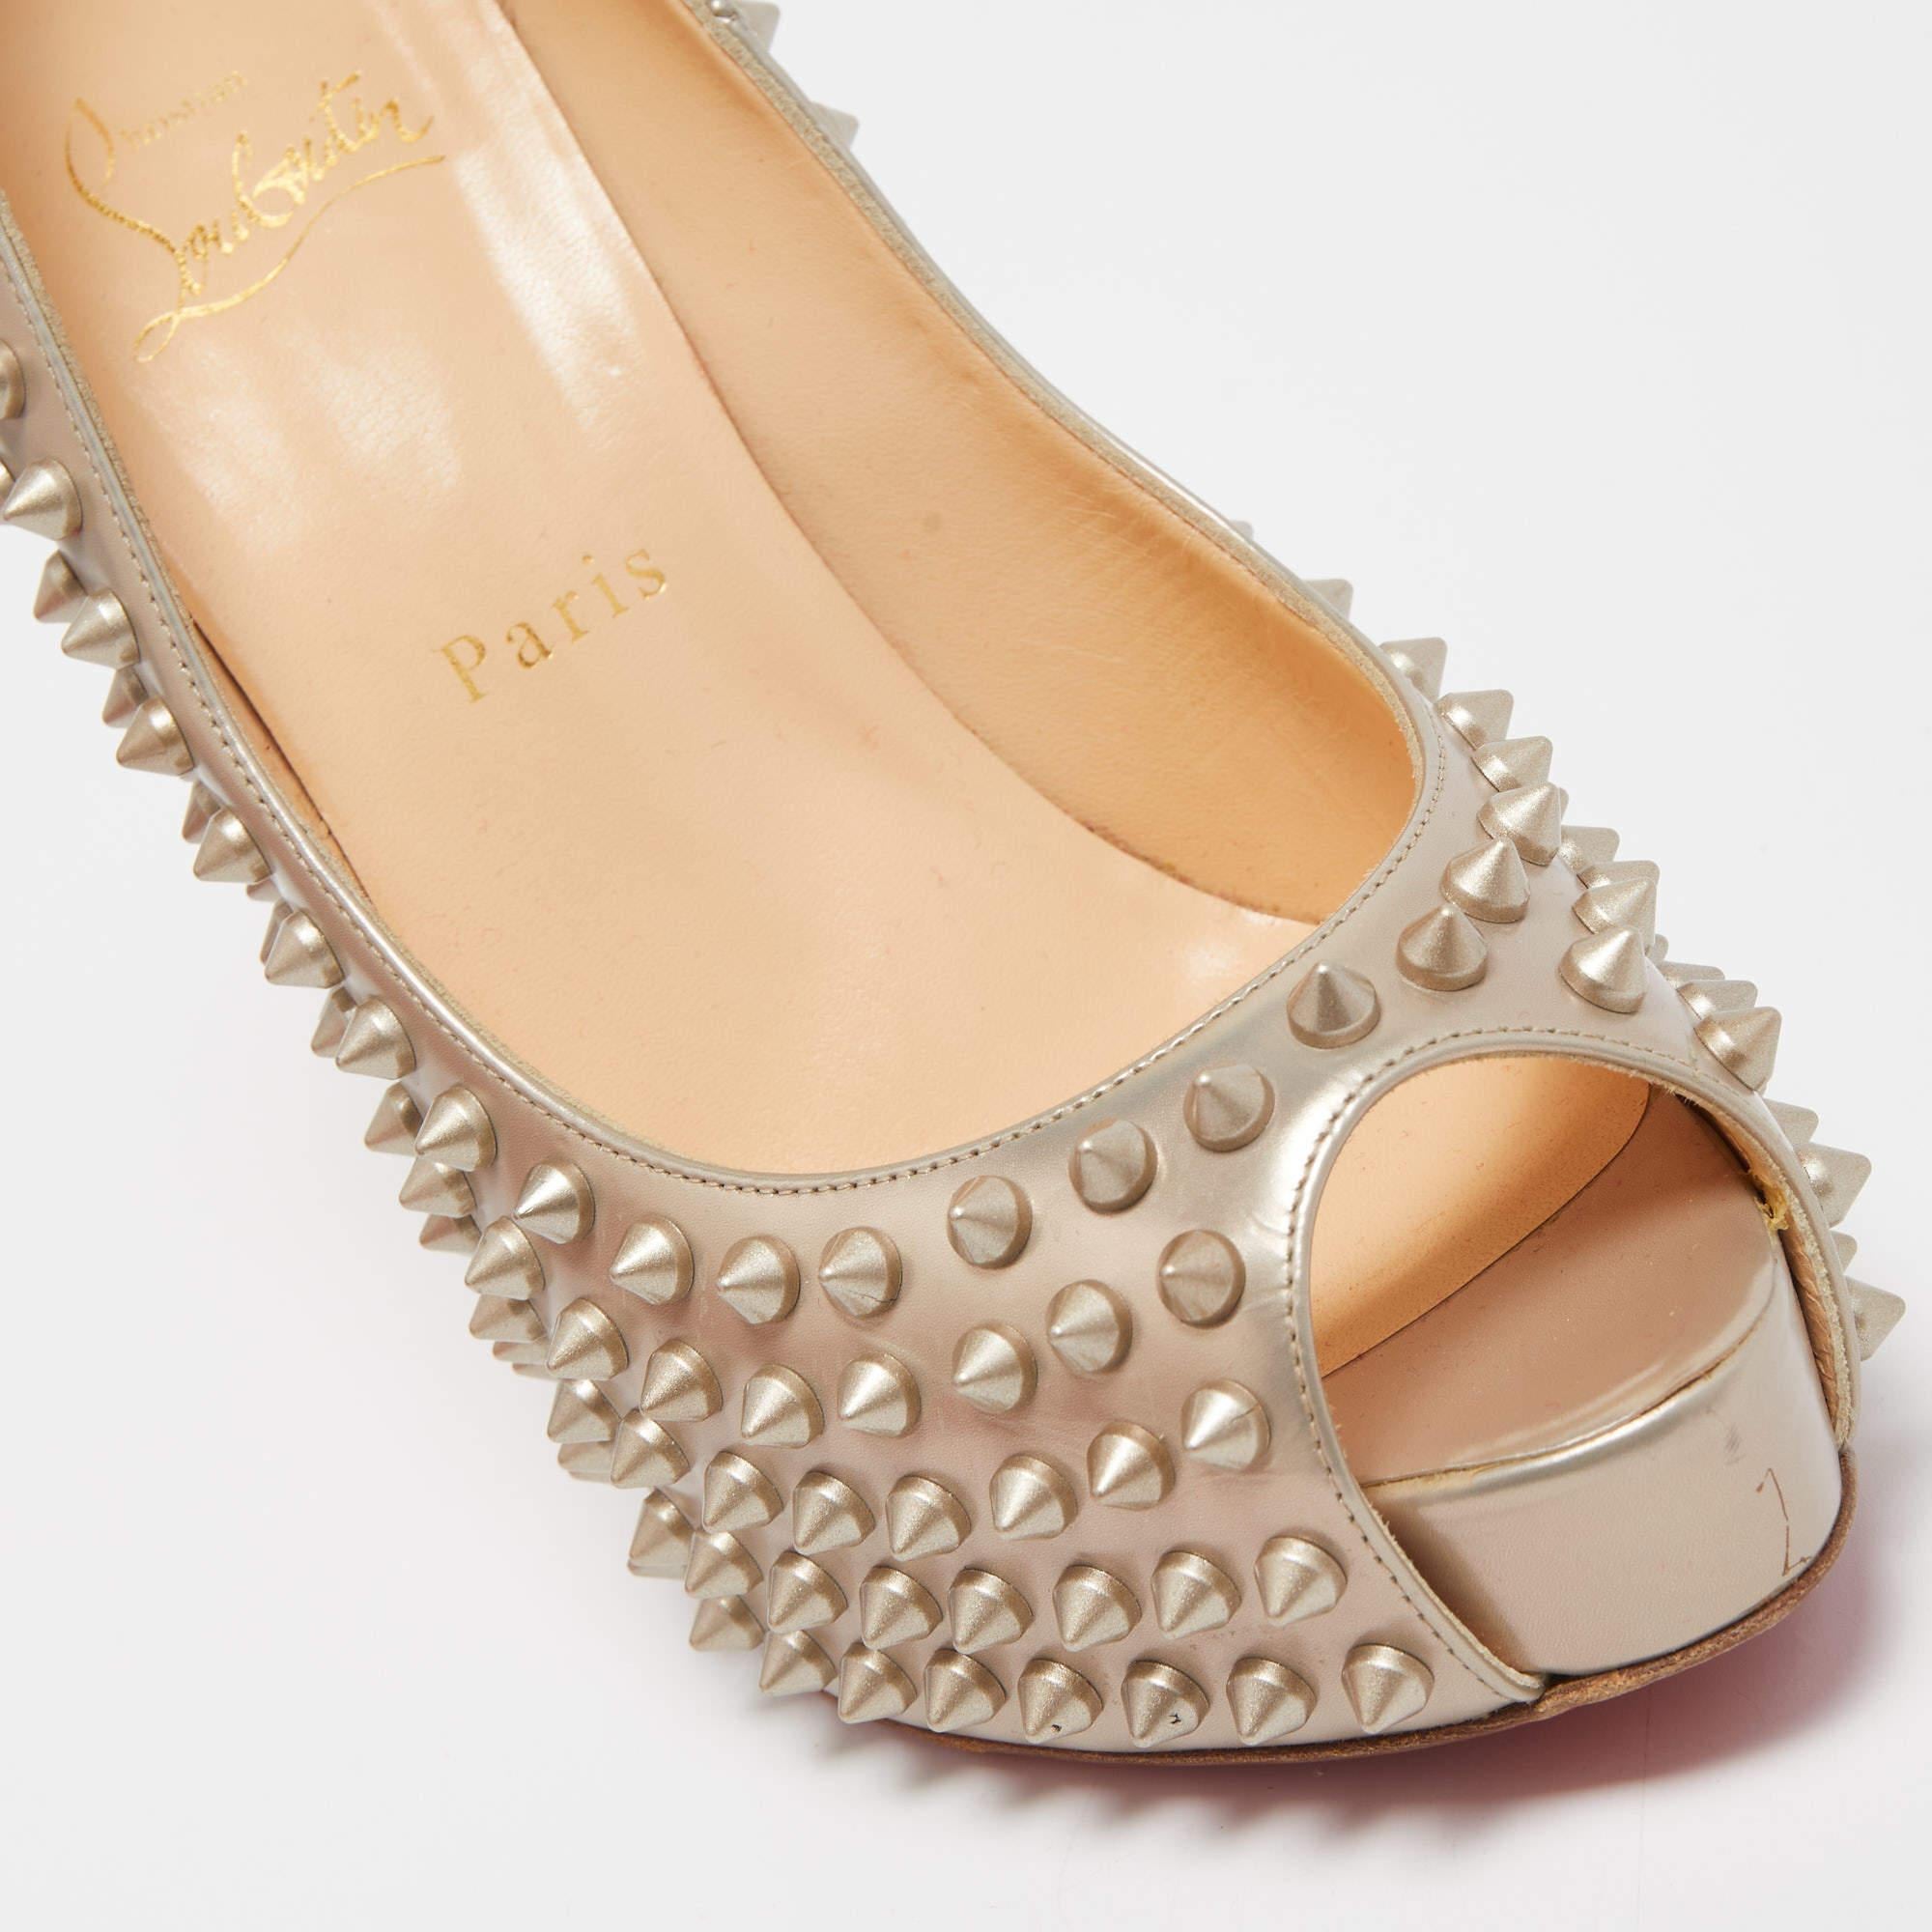 Christian Louboutin Beige Leather Very Prive Spike Pumps Size 37.5 For Sale 3